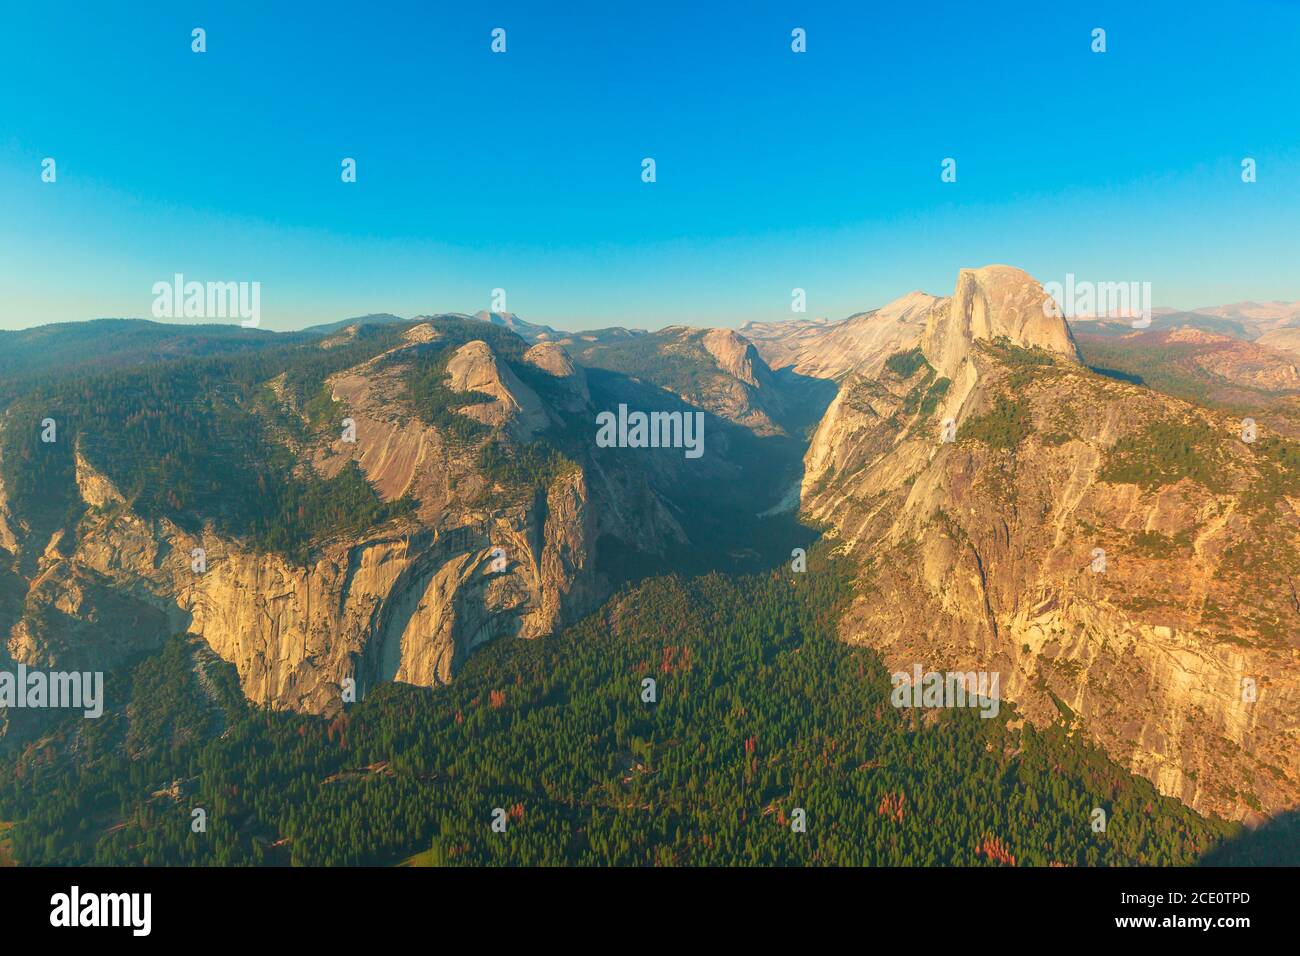 Washburn Point sunset panorama in Yosemite National Park, California, United States. View of Half Dome, Liberty Cap, Yosemite Valley, Vernal Fall, and Stock Photo